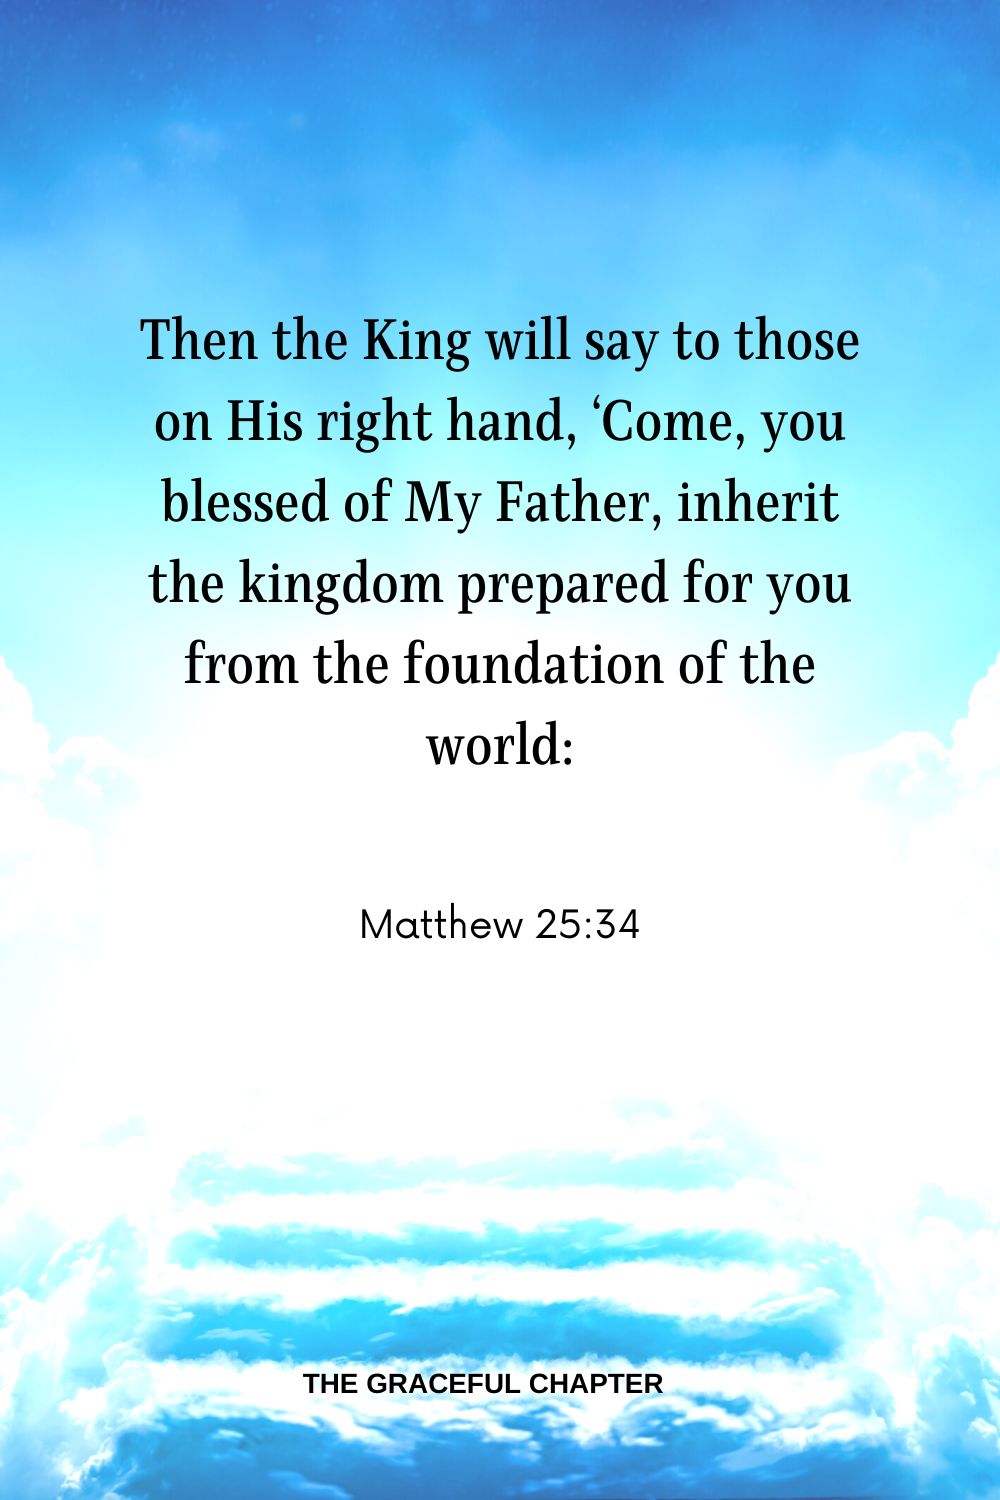 Then the King will say to those on His right hand, ‘Come, you blessed of My Father, inherit the kingdom prepared for you from the foundation of the world: Matthew 25:34